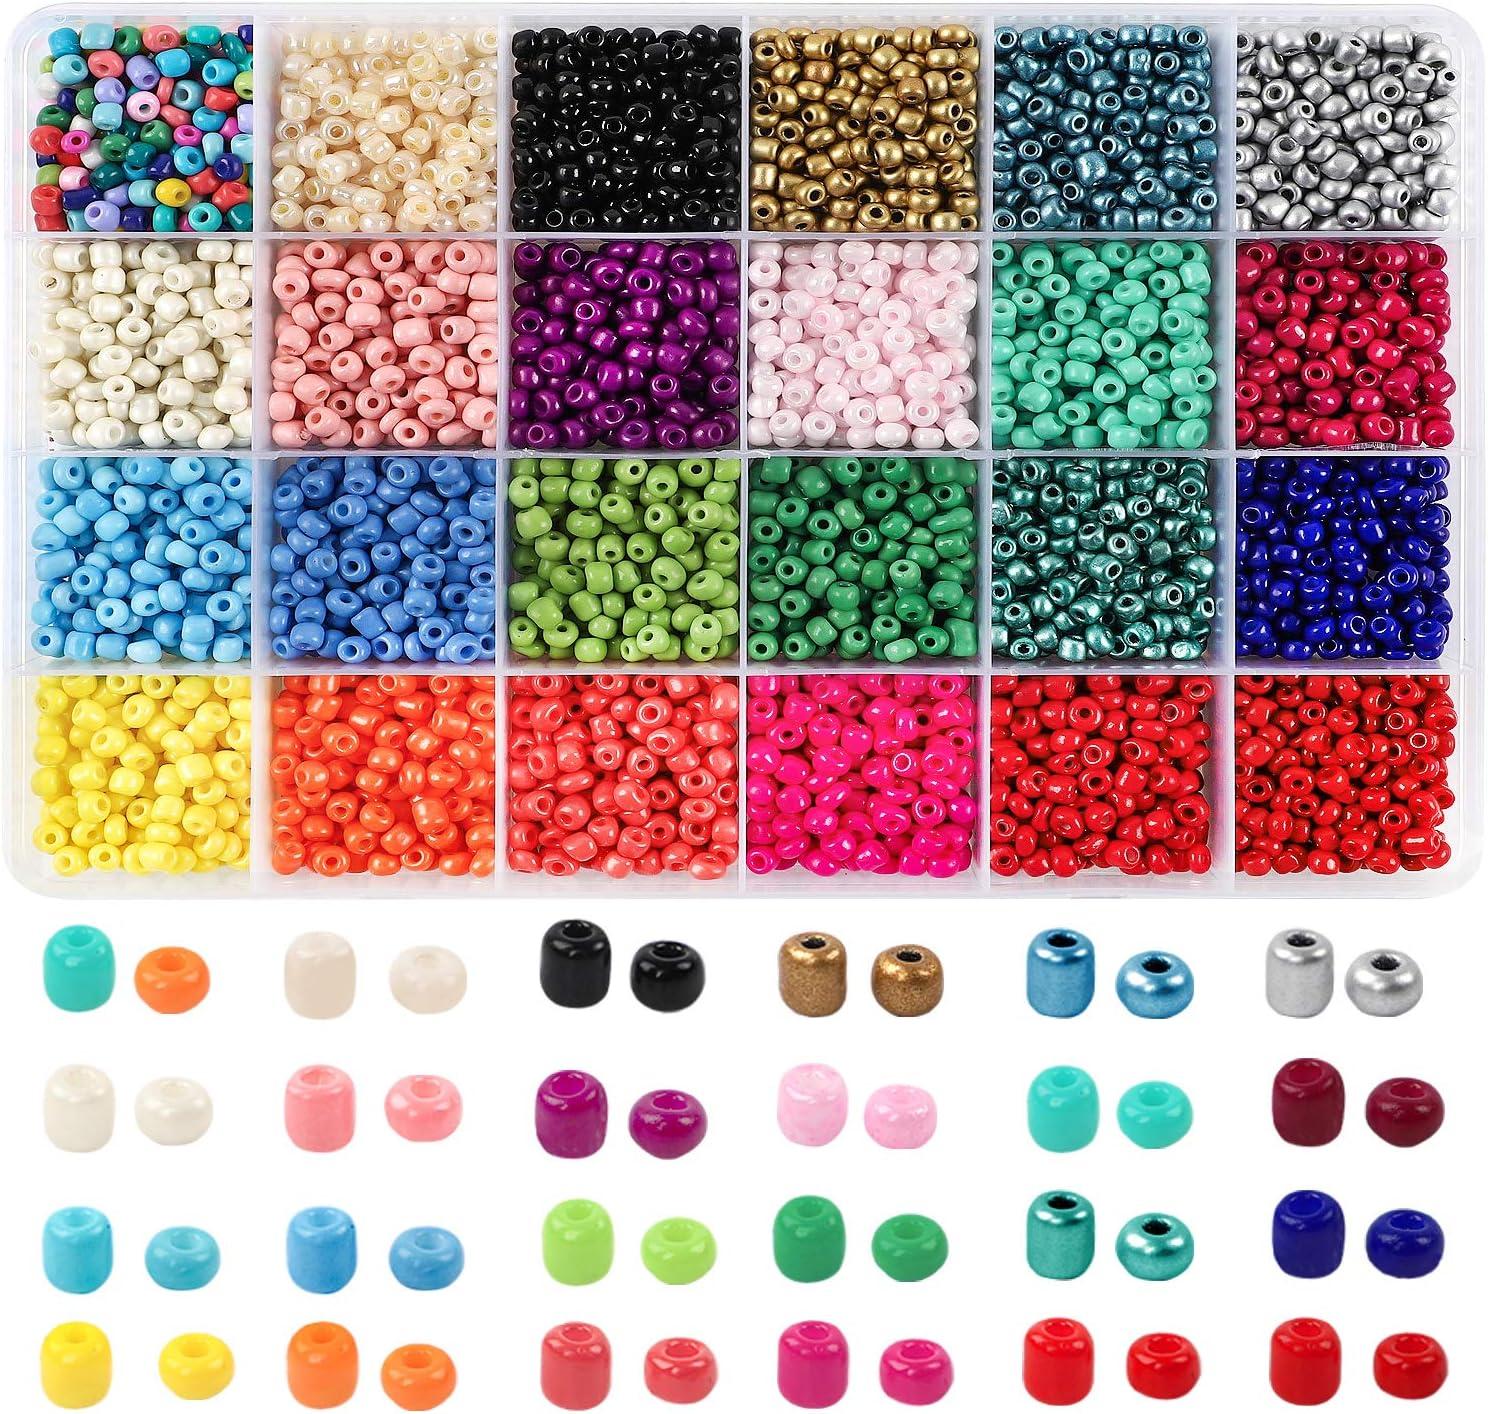 Wholesale 4920 4mm Glass Seed Beads Alphabet Letter Beads for Bracelets  Making Kit Jewelry Crafts with Accessories DIY Material From m.